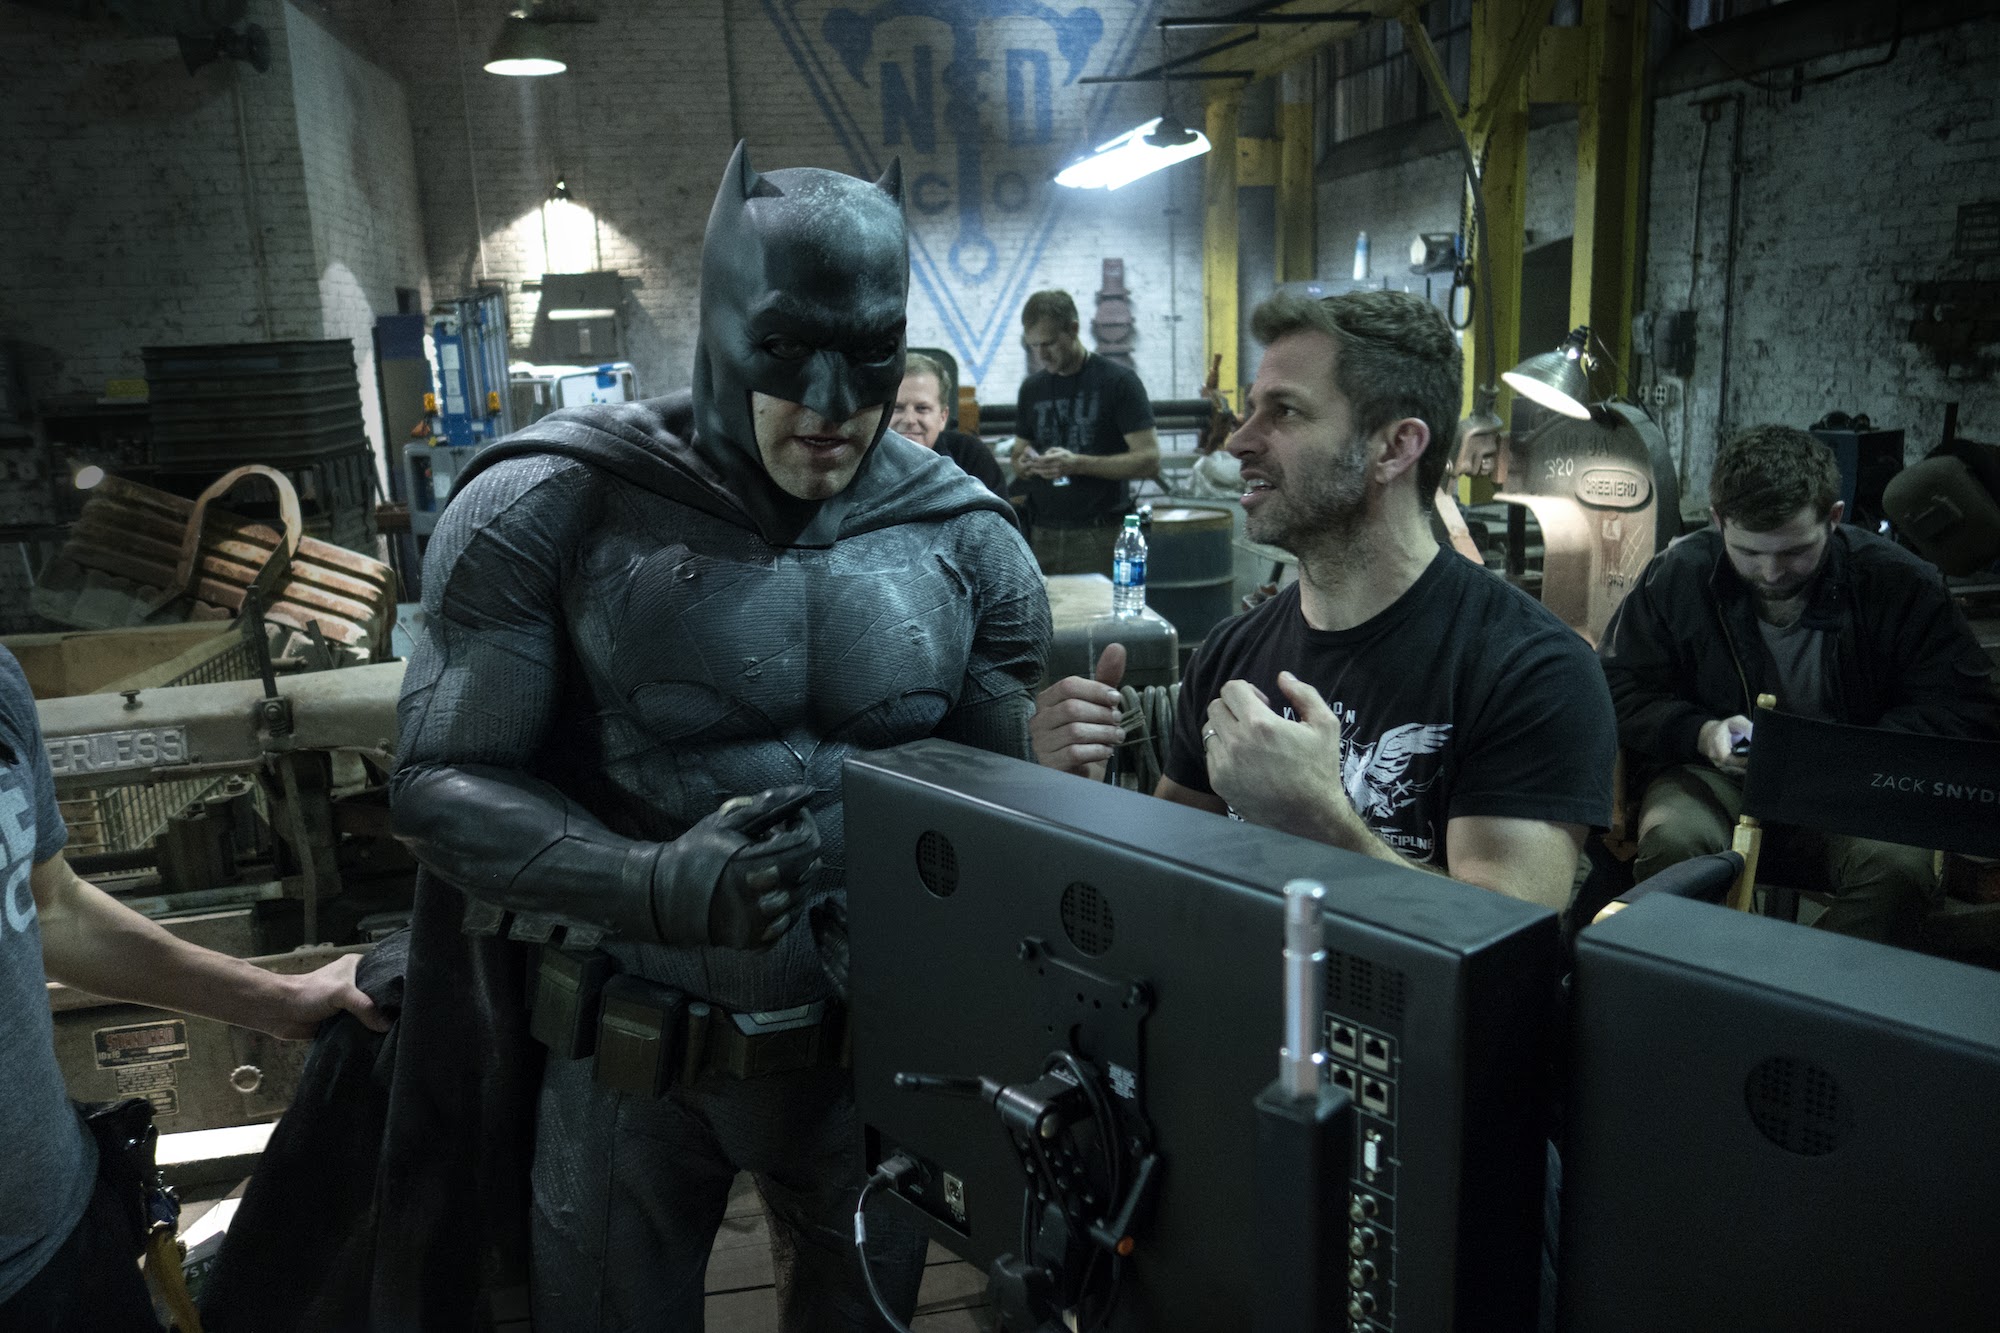 A good director and Zack Snyder